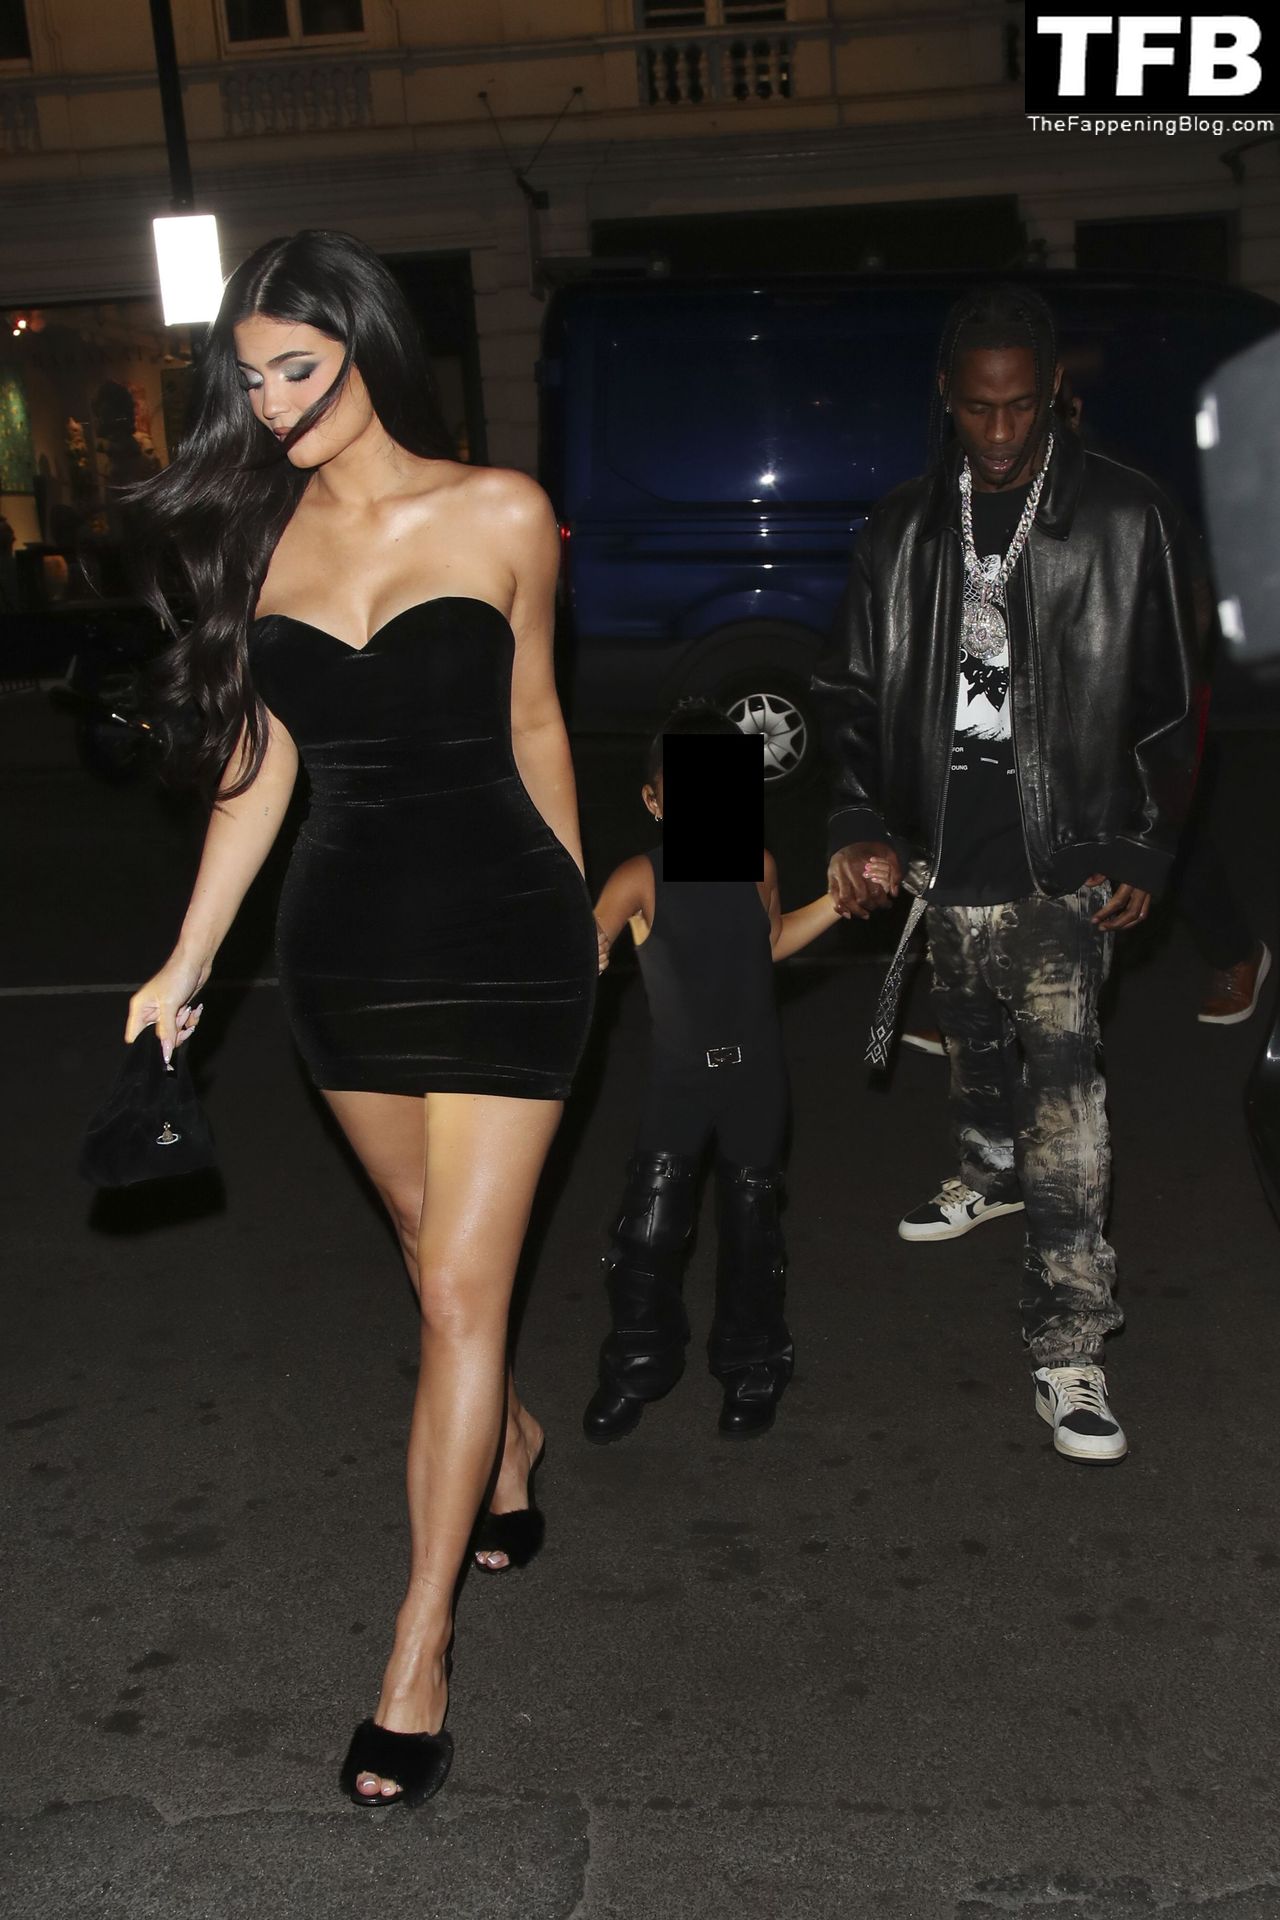 Kylie Jenner Sexy The Fappening Blog 23 - Kylie Jenner Steps Out For Dinner at Nobu London (26 Photos)